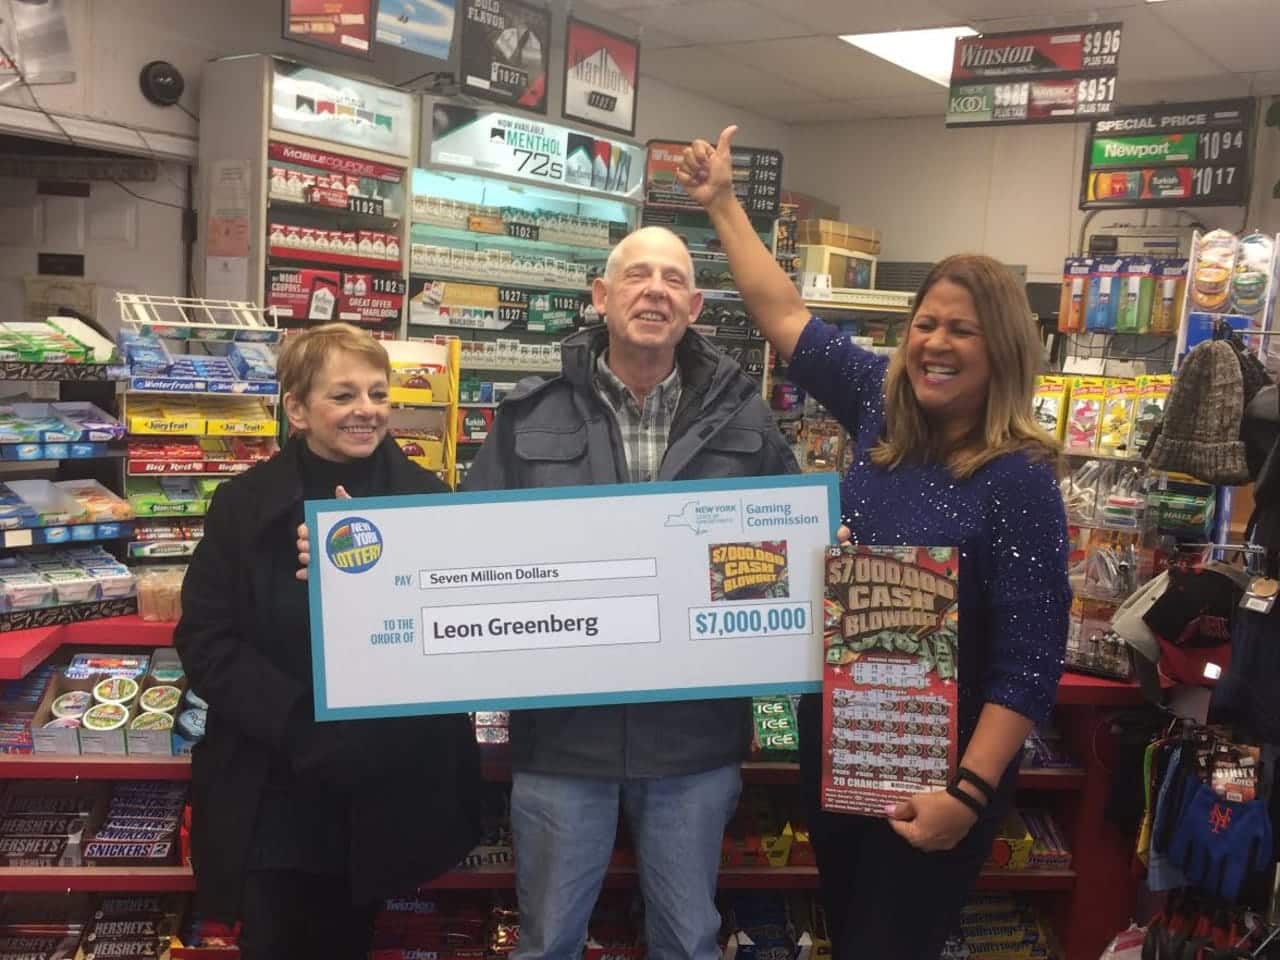 Ossining resident Leon Greenberg and his wife, Karin, at left, are introduced as $7 million New York State Lottery winners.